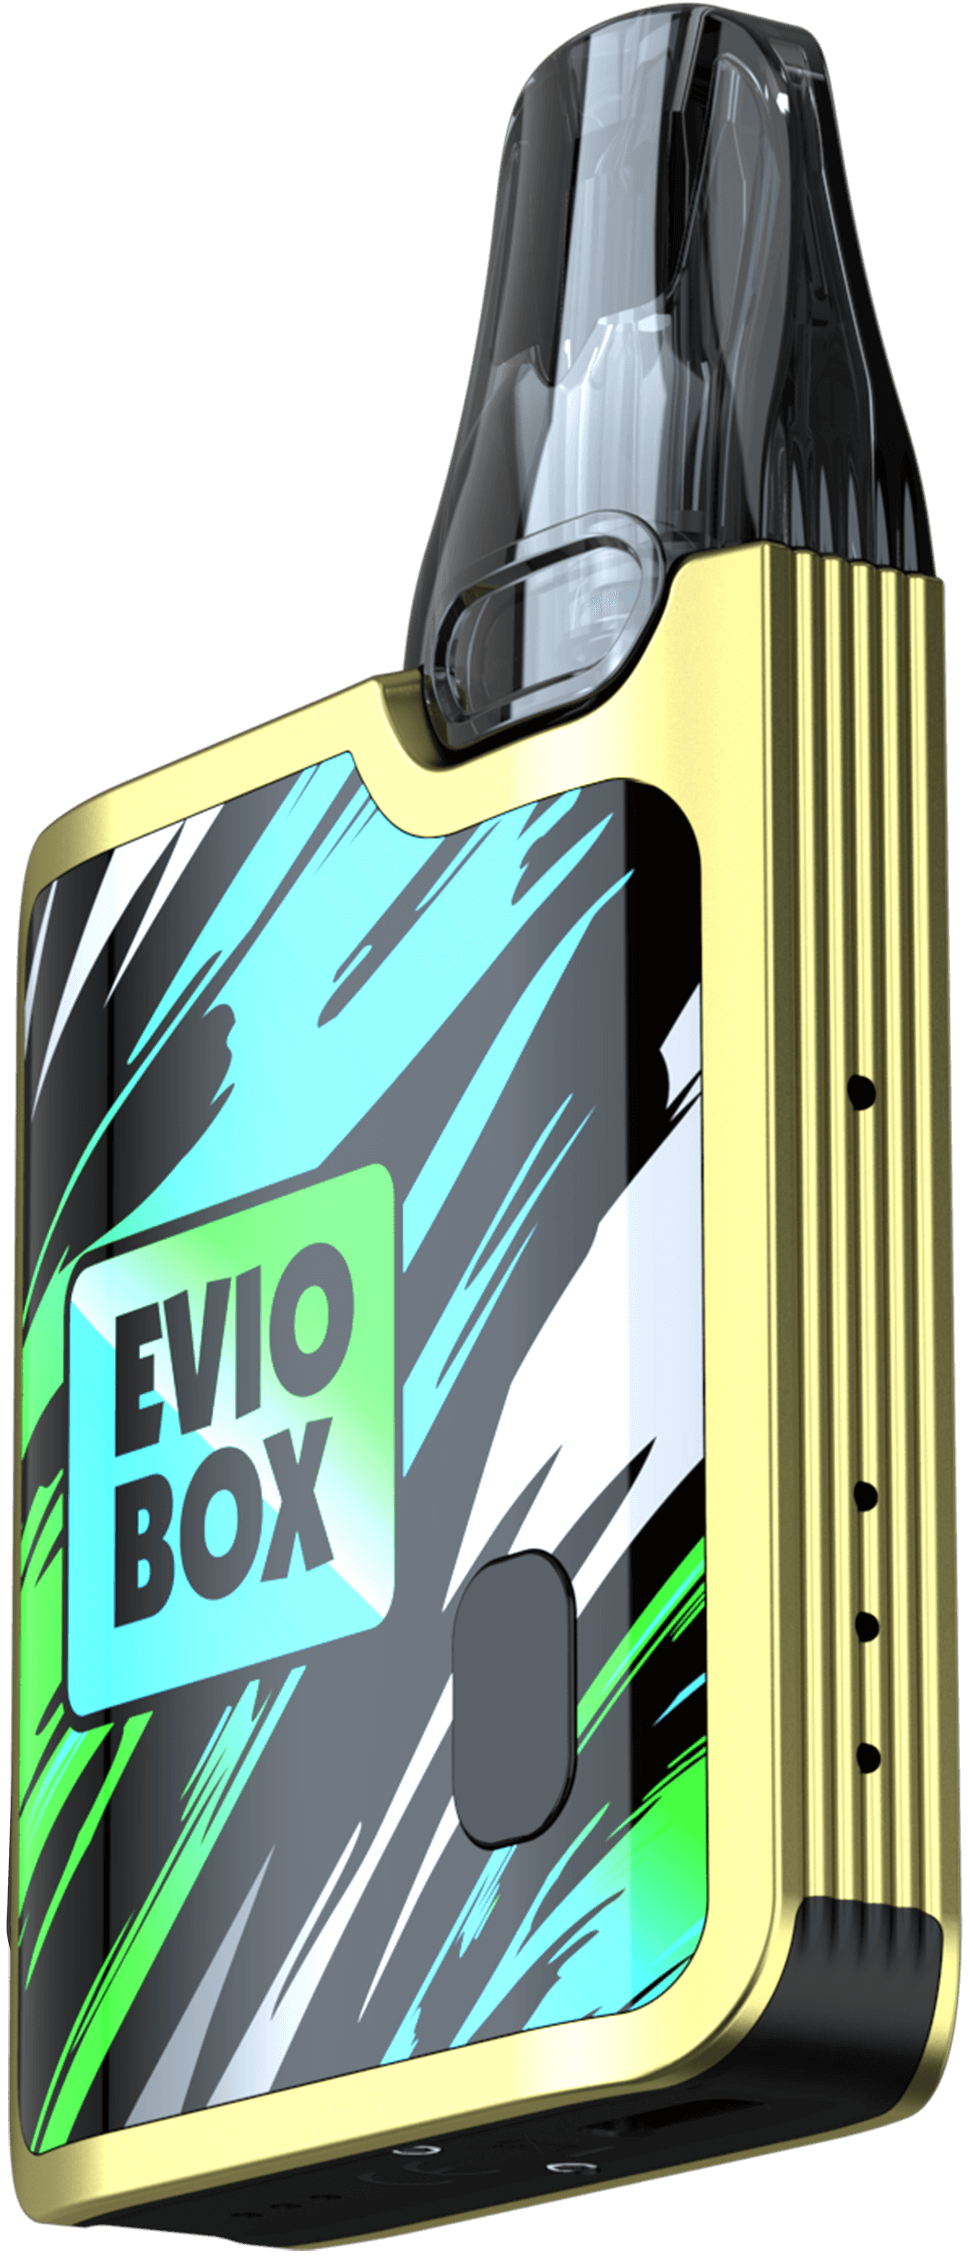 The Evio Box pod kit could unlock the real taste for you